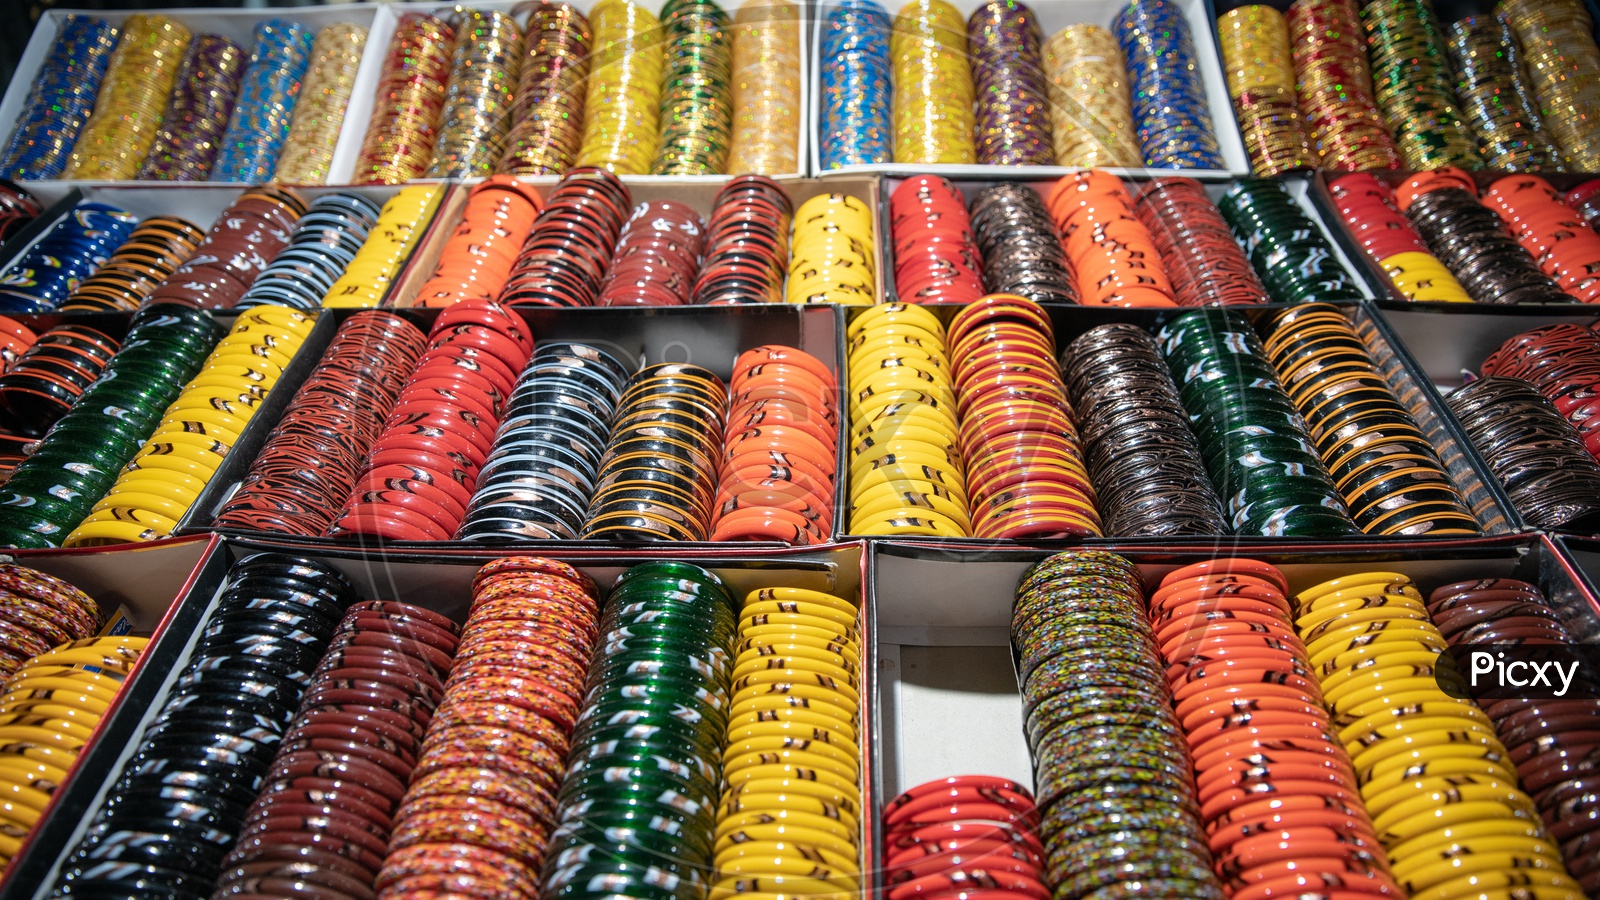 Bangles in a vendor Stall